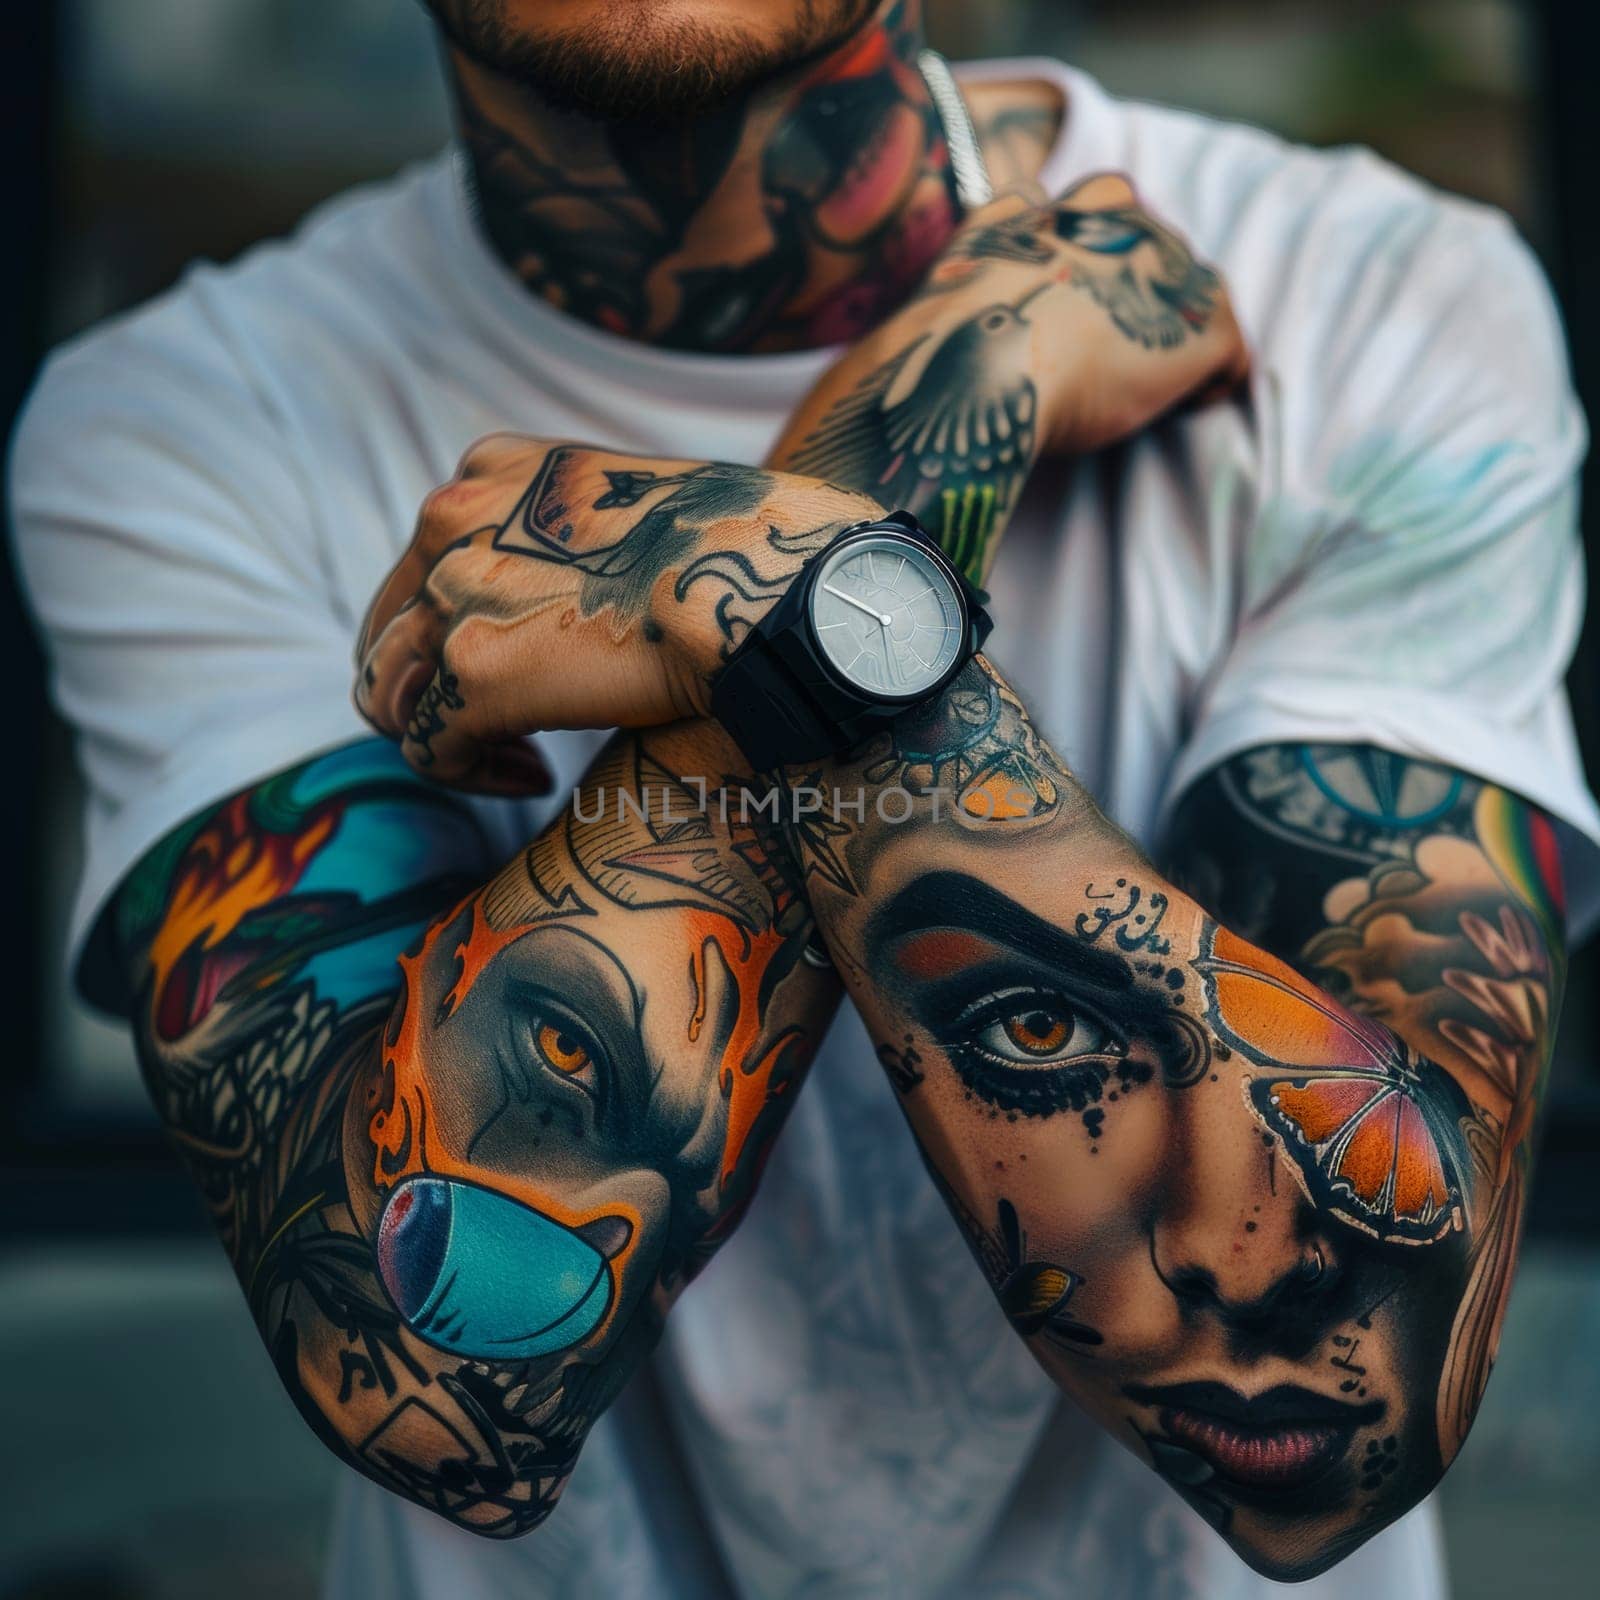 Man with creative tattoos on his arms. by papatonic